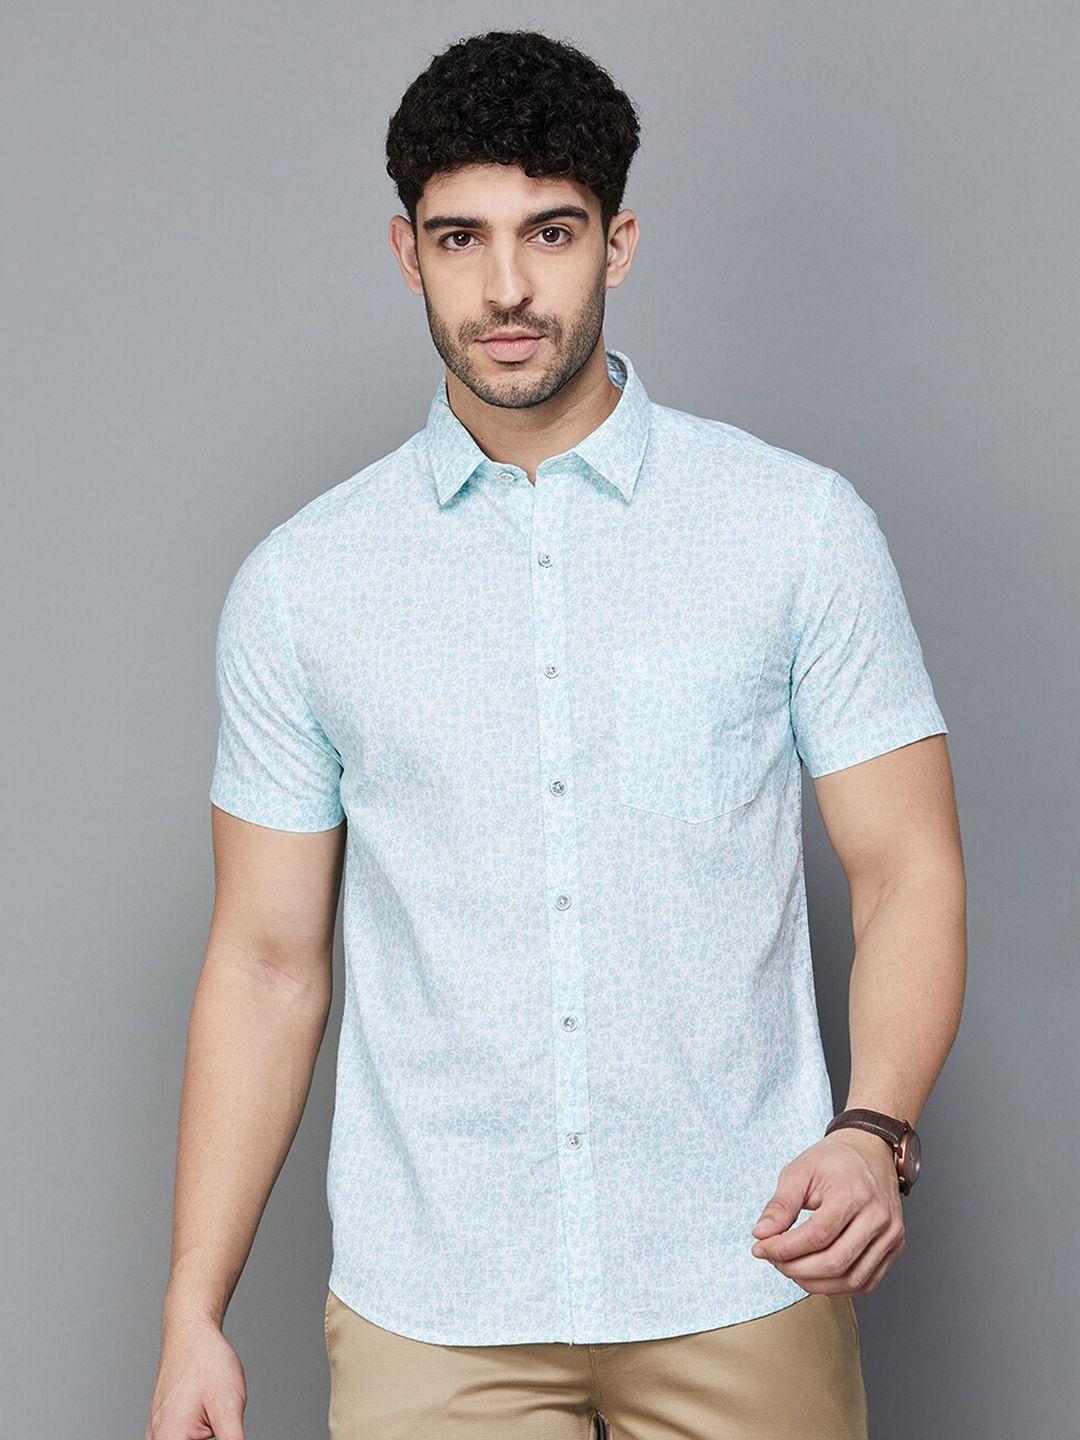 code-by-lifestyle-floral-printed-slim-fit-cotton-shirt